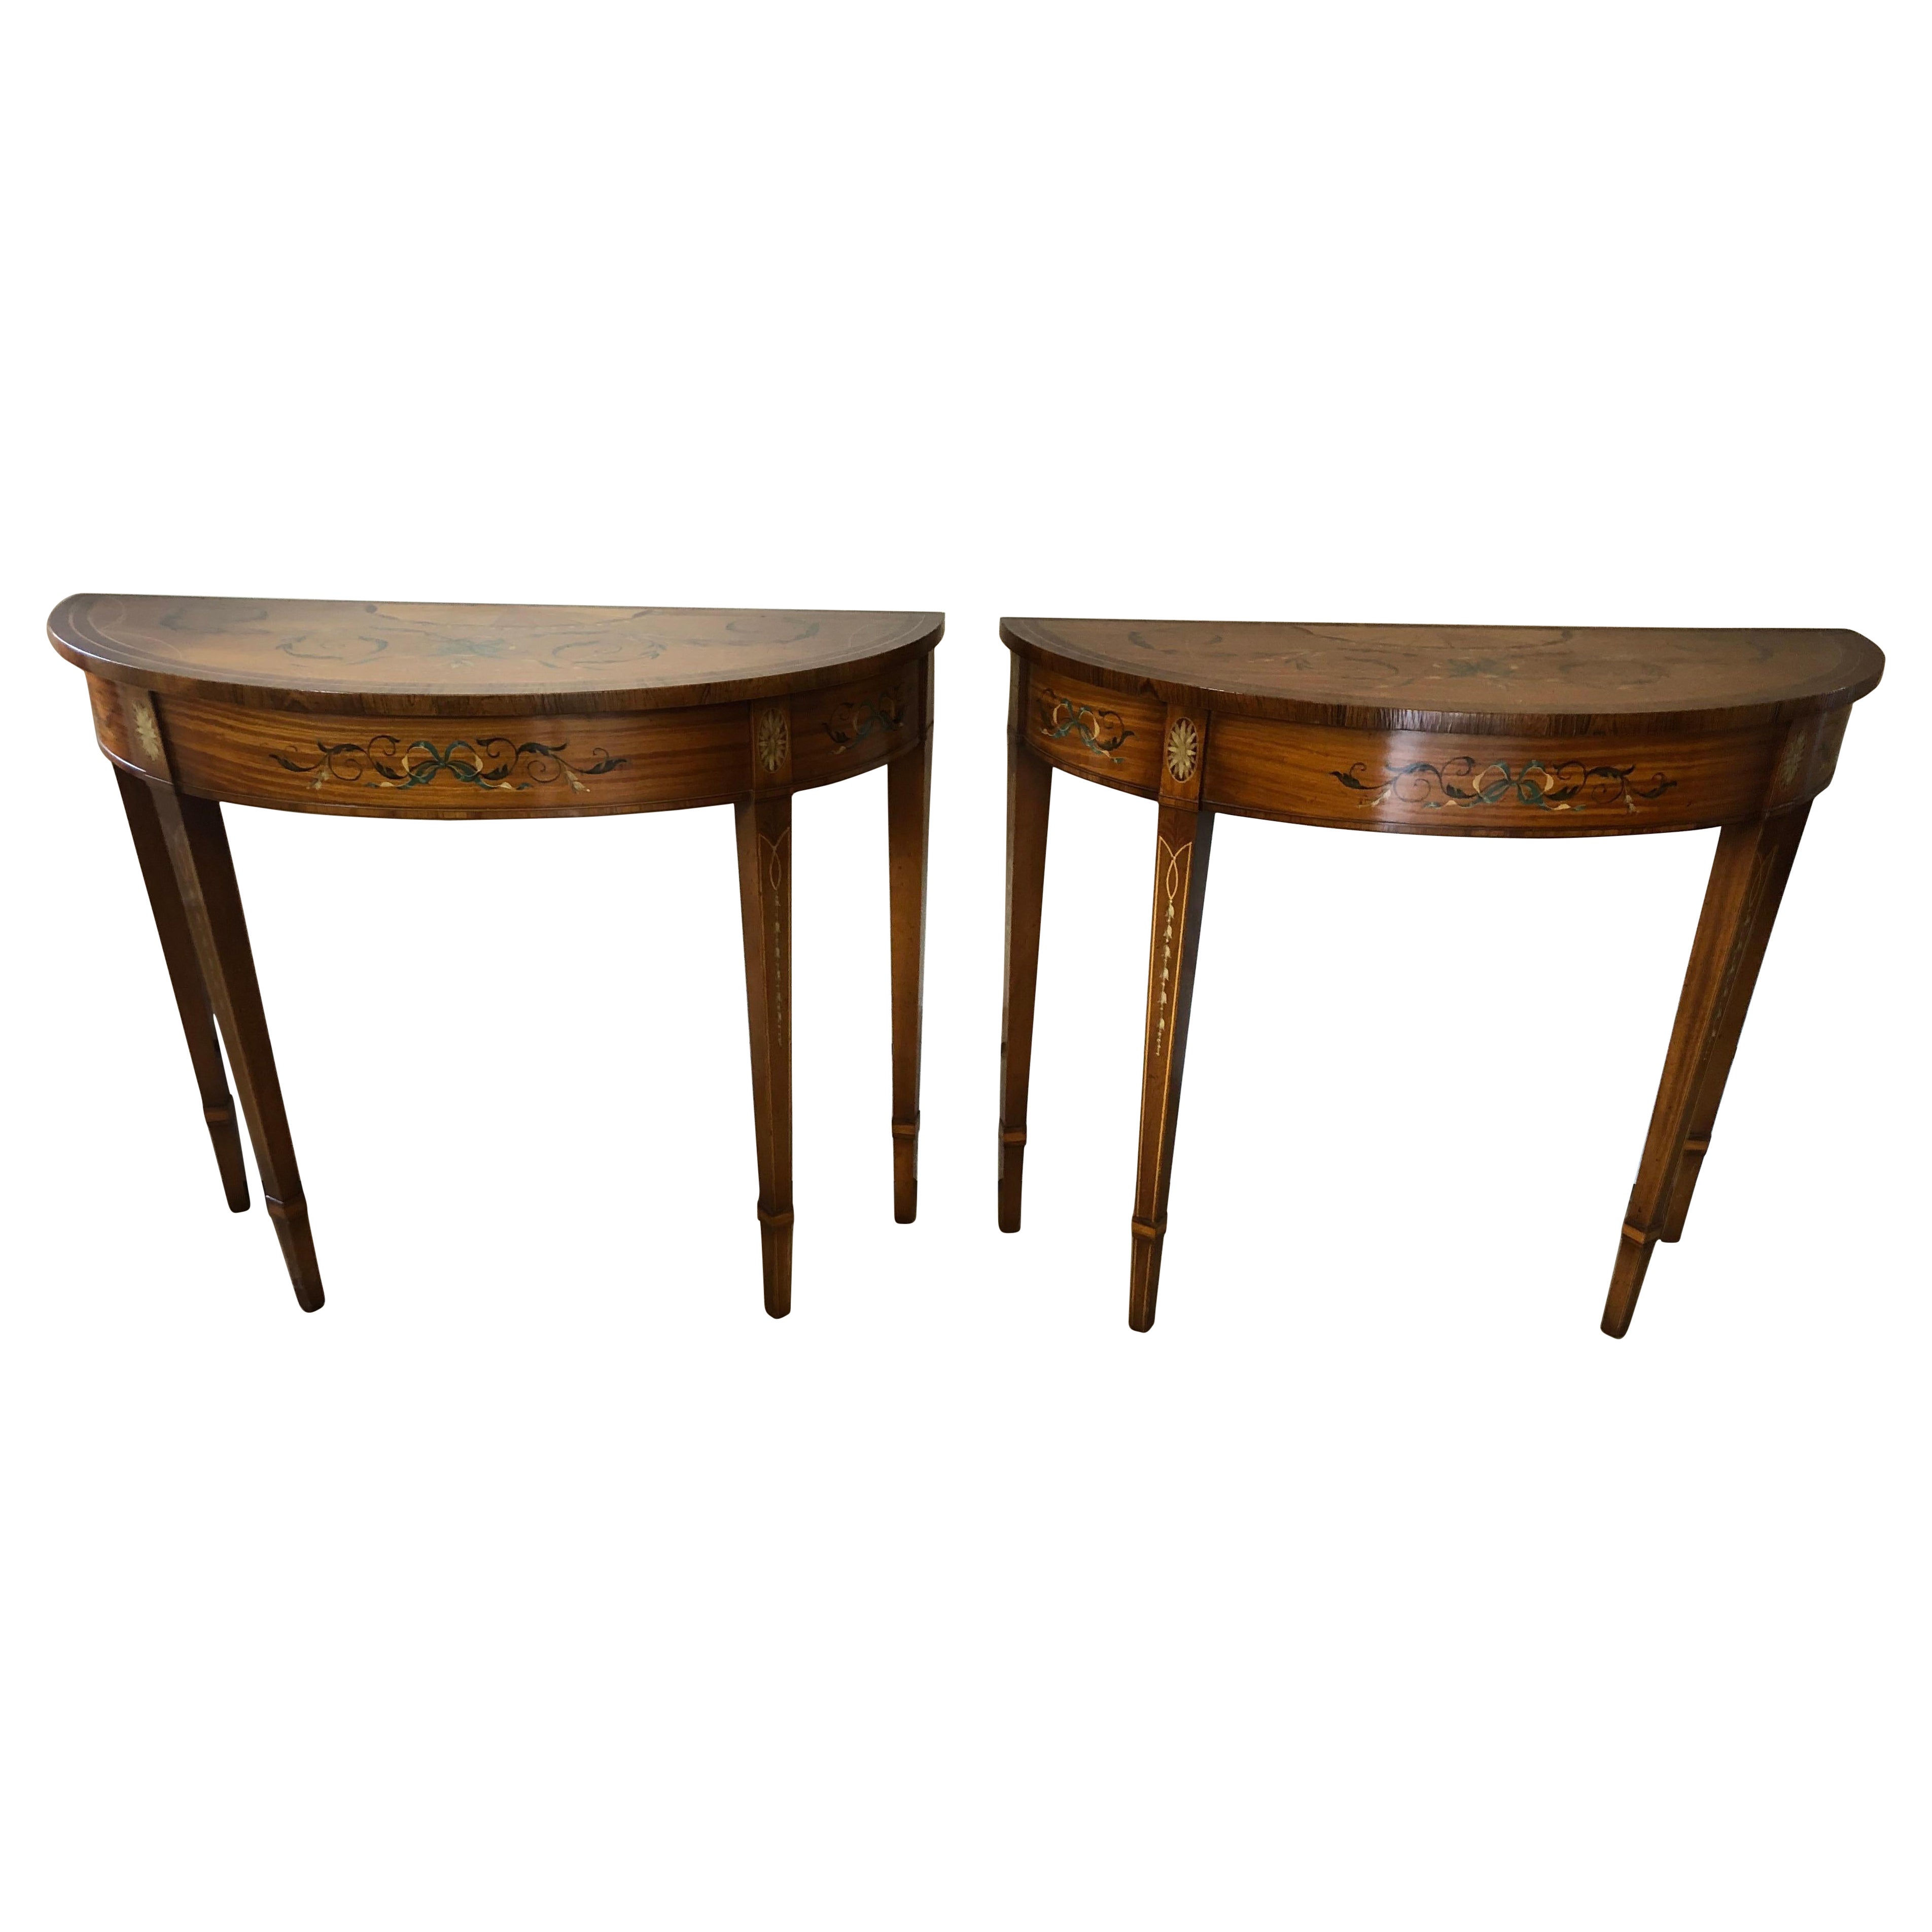 Gorgeous Stately Pair of Adams Style Demilune Console Tables